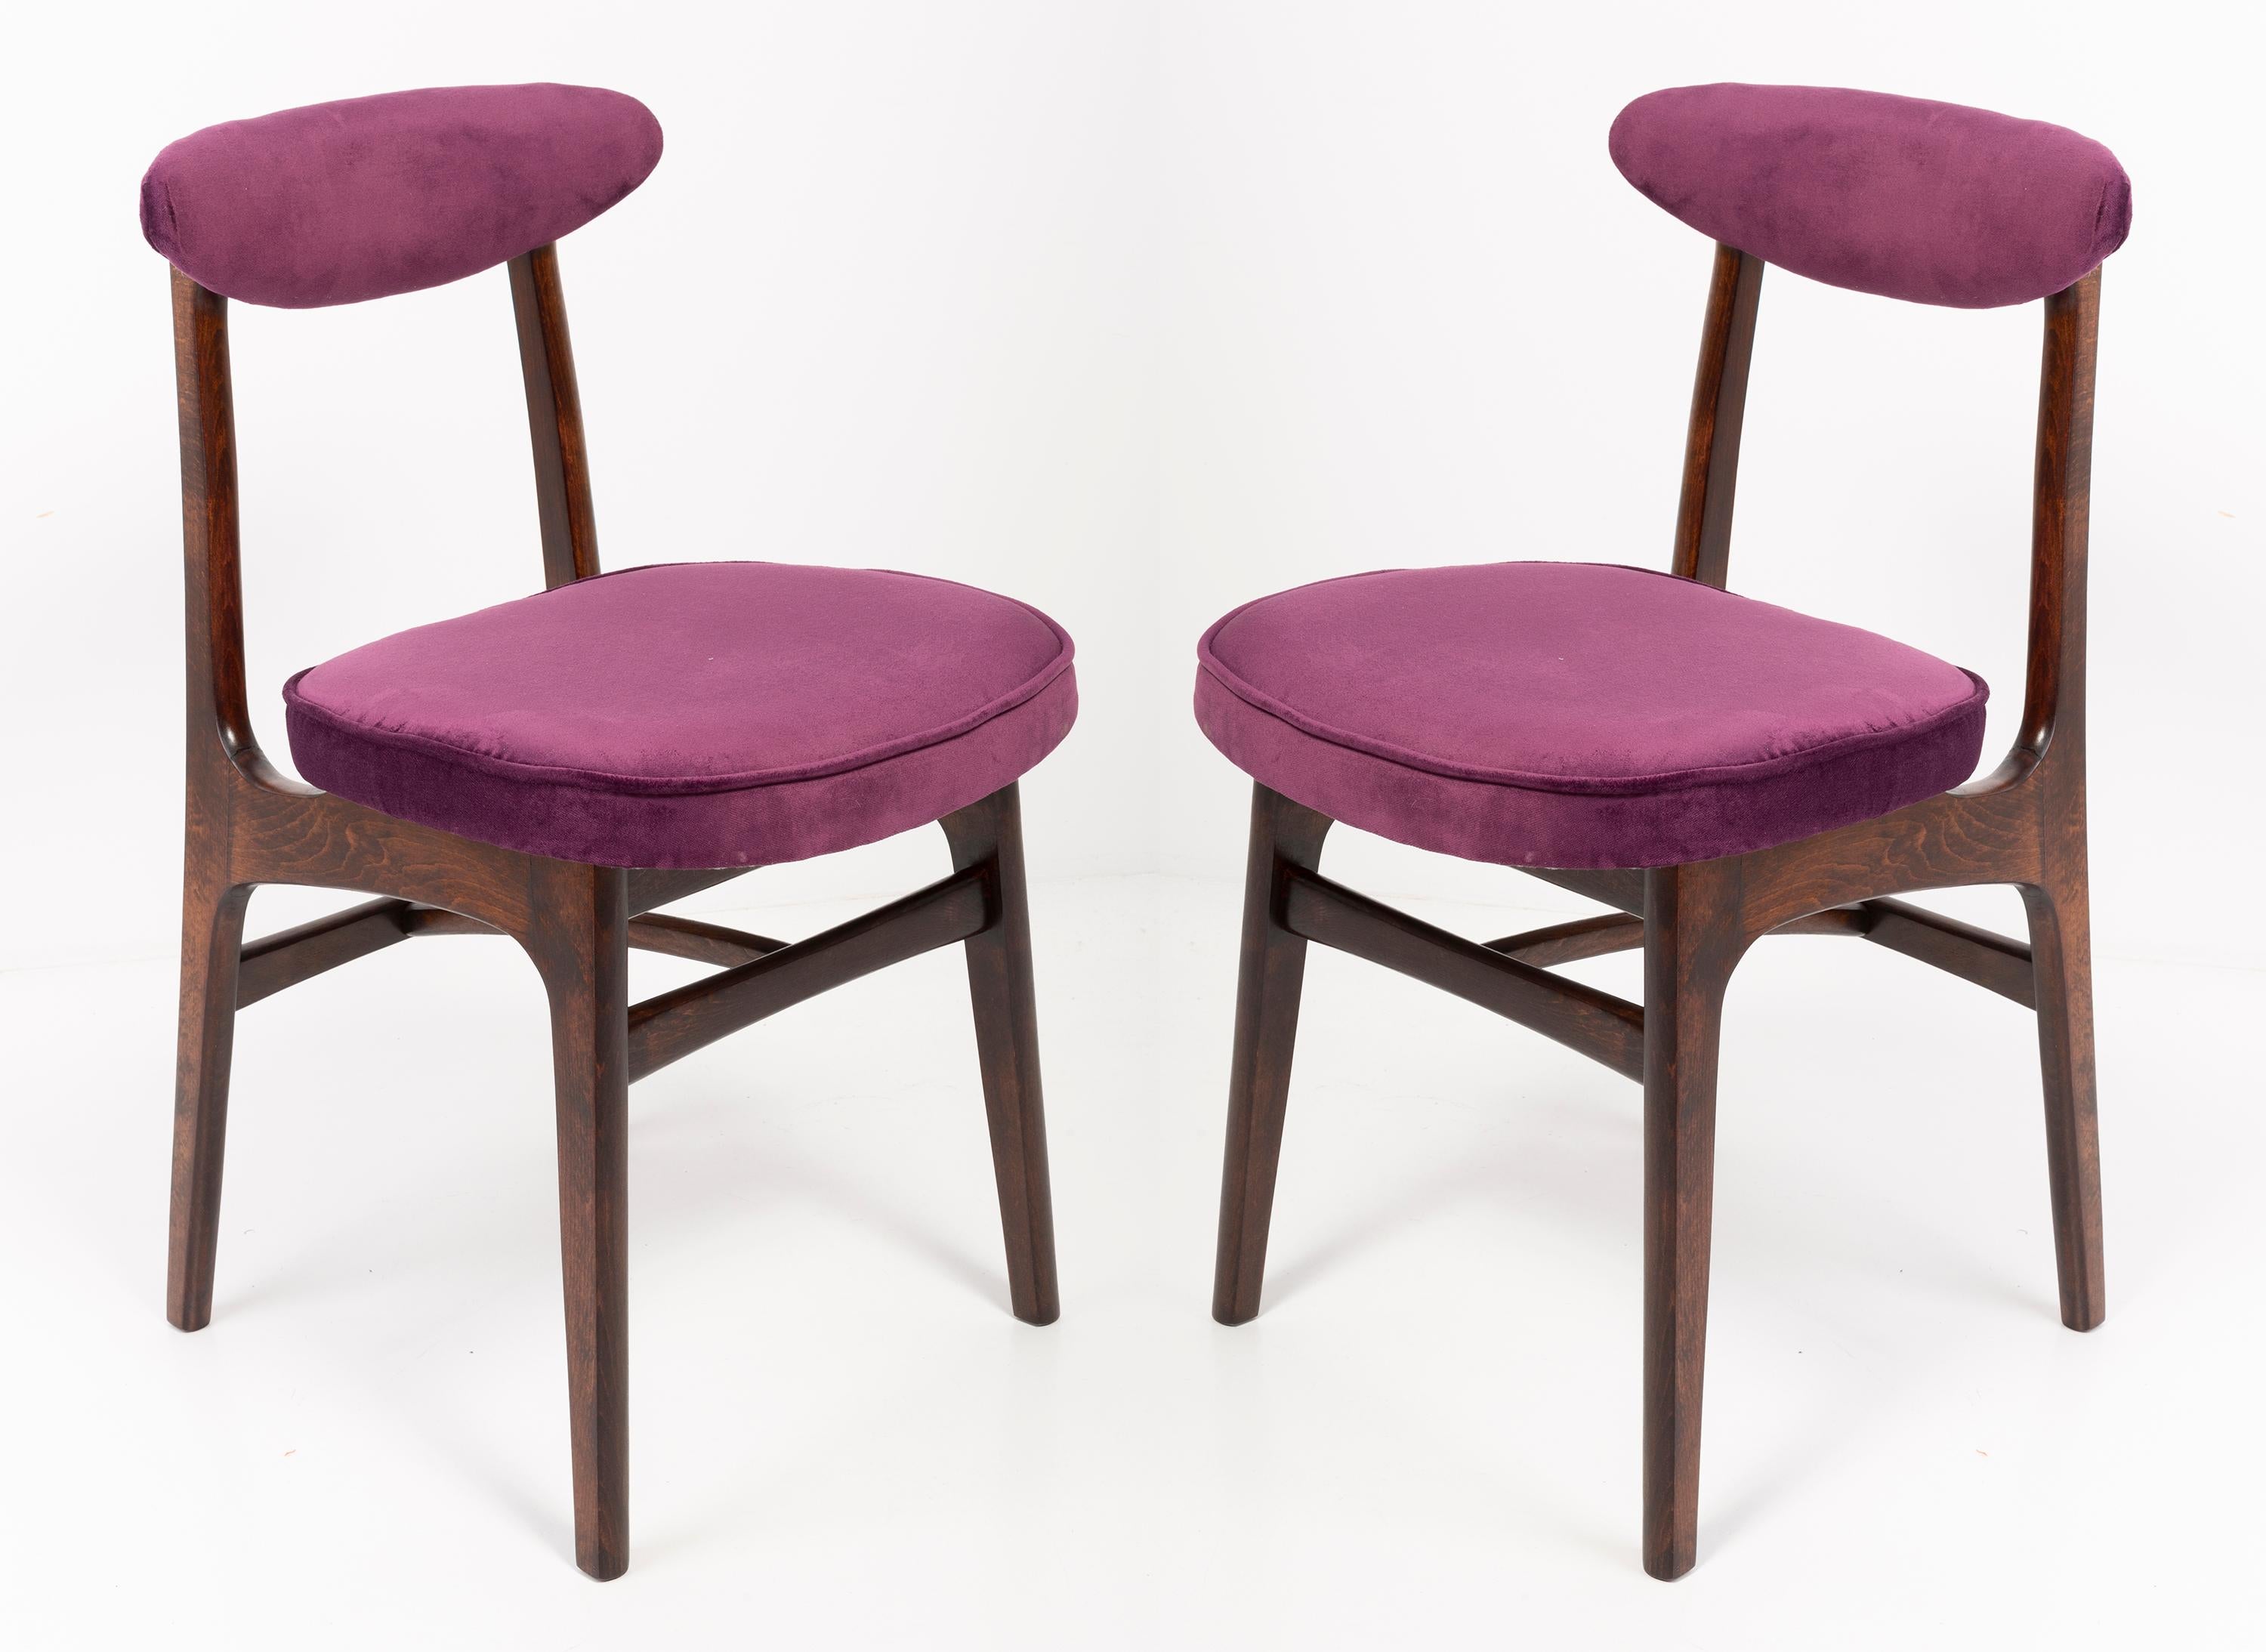 Twelve chairs designed by Prof. Rajmund Halas. It has been made of beechwood. Chairs are after undergone a complete upholstery renovation, the woodwork has been refreshed. Seats and backs were dressed in a plum (color 969), durable and pleasant to